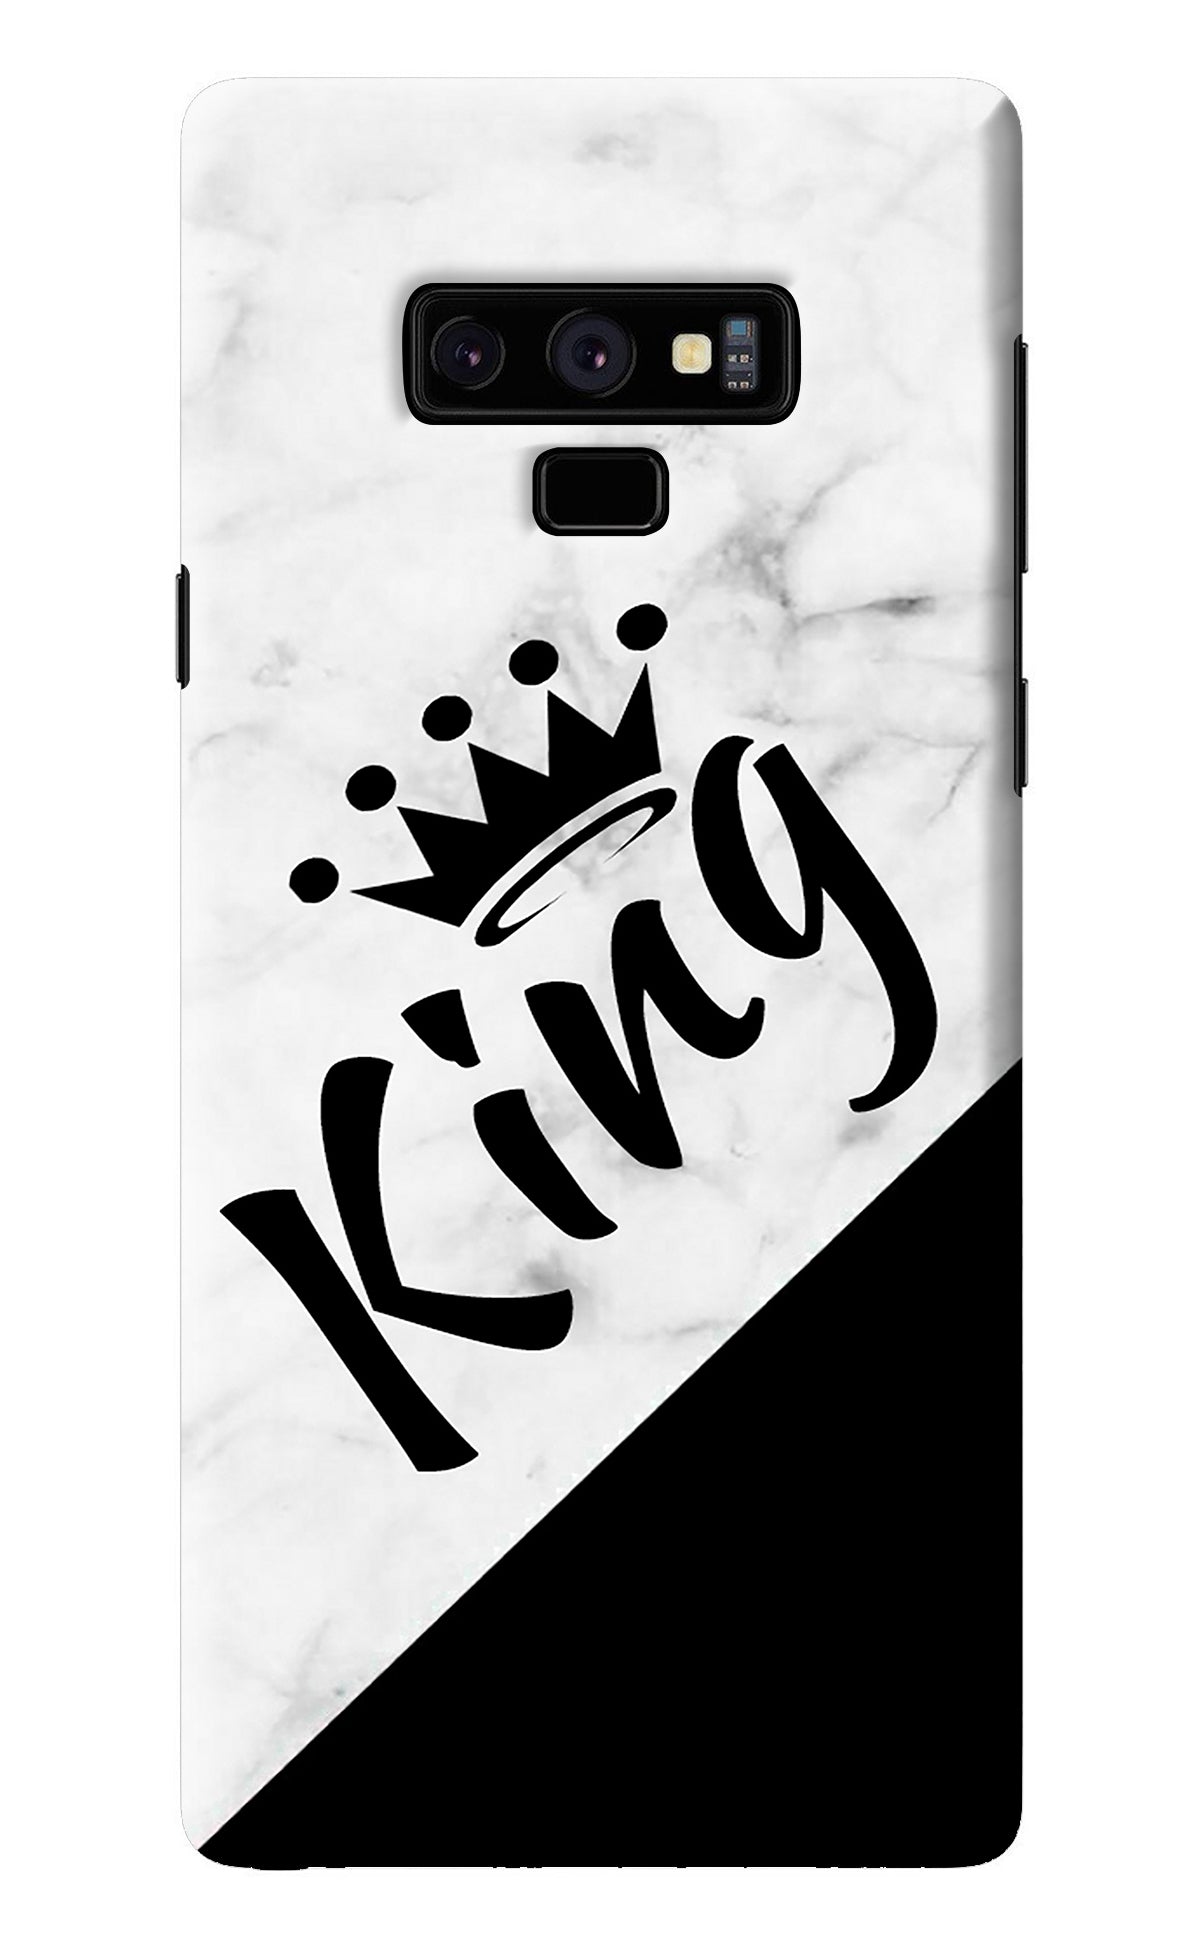 King Samsung Note 9 Back Cover